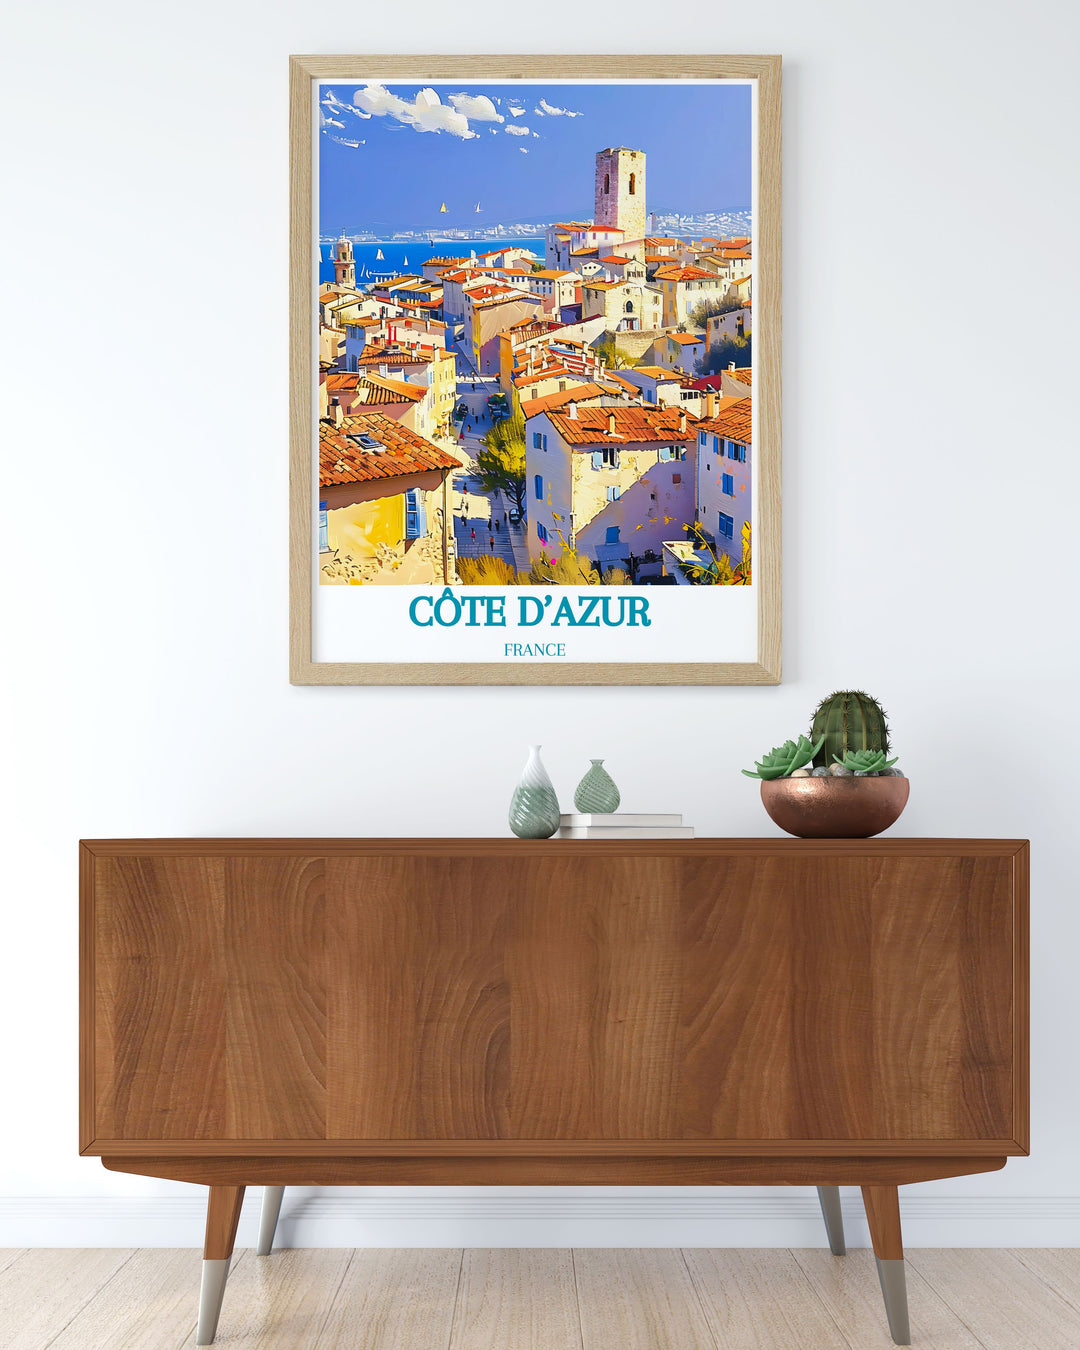 Canvas art of the Old Town of Antibes in the Côte dAzur, France, featuring the stunning views of the Mediterranean. This piece captures the charming streets, clear waters, and vibrant marketplace, making it a perfect addition to any nature inspired decor.